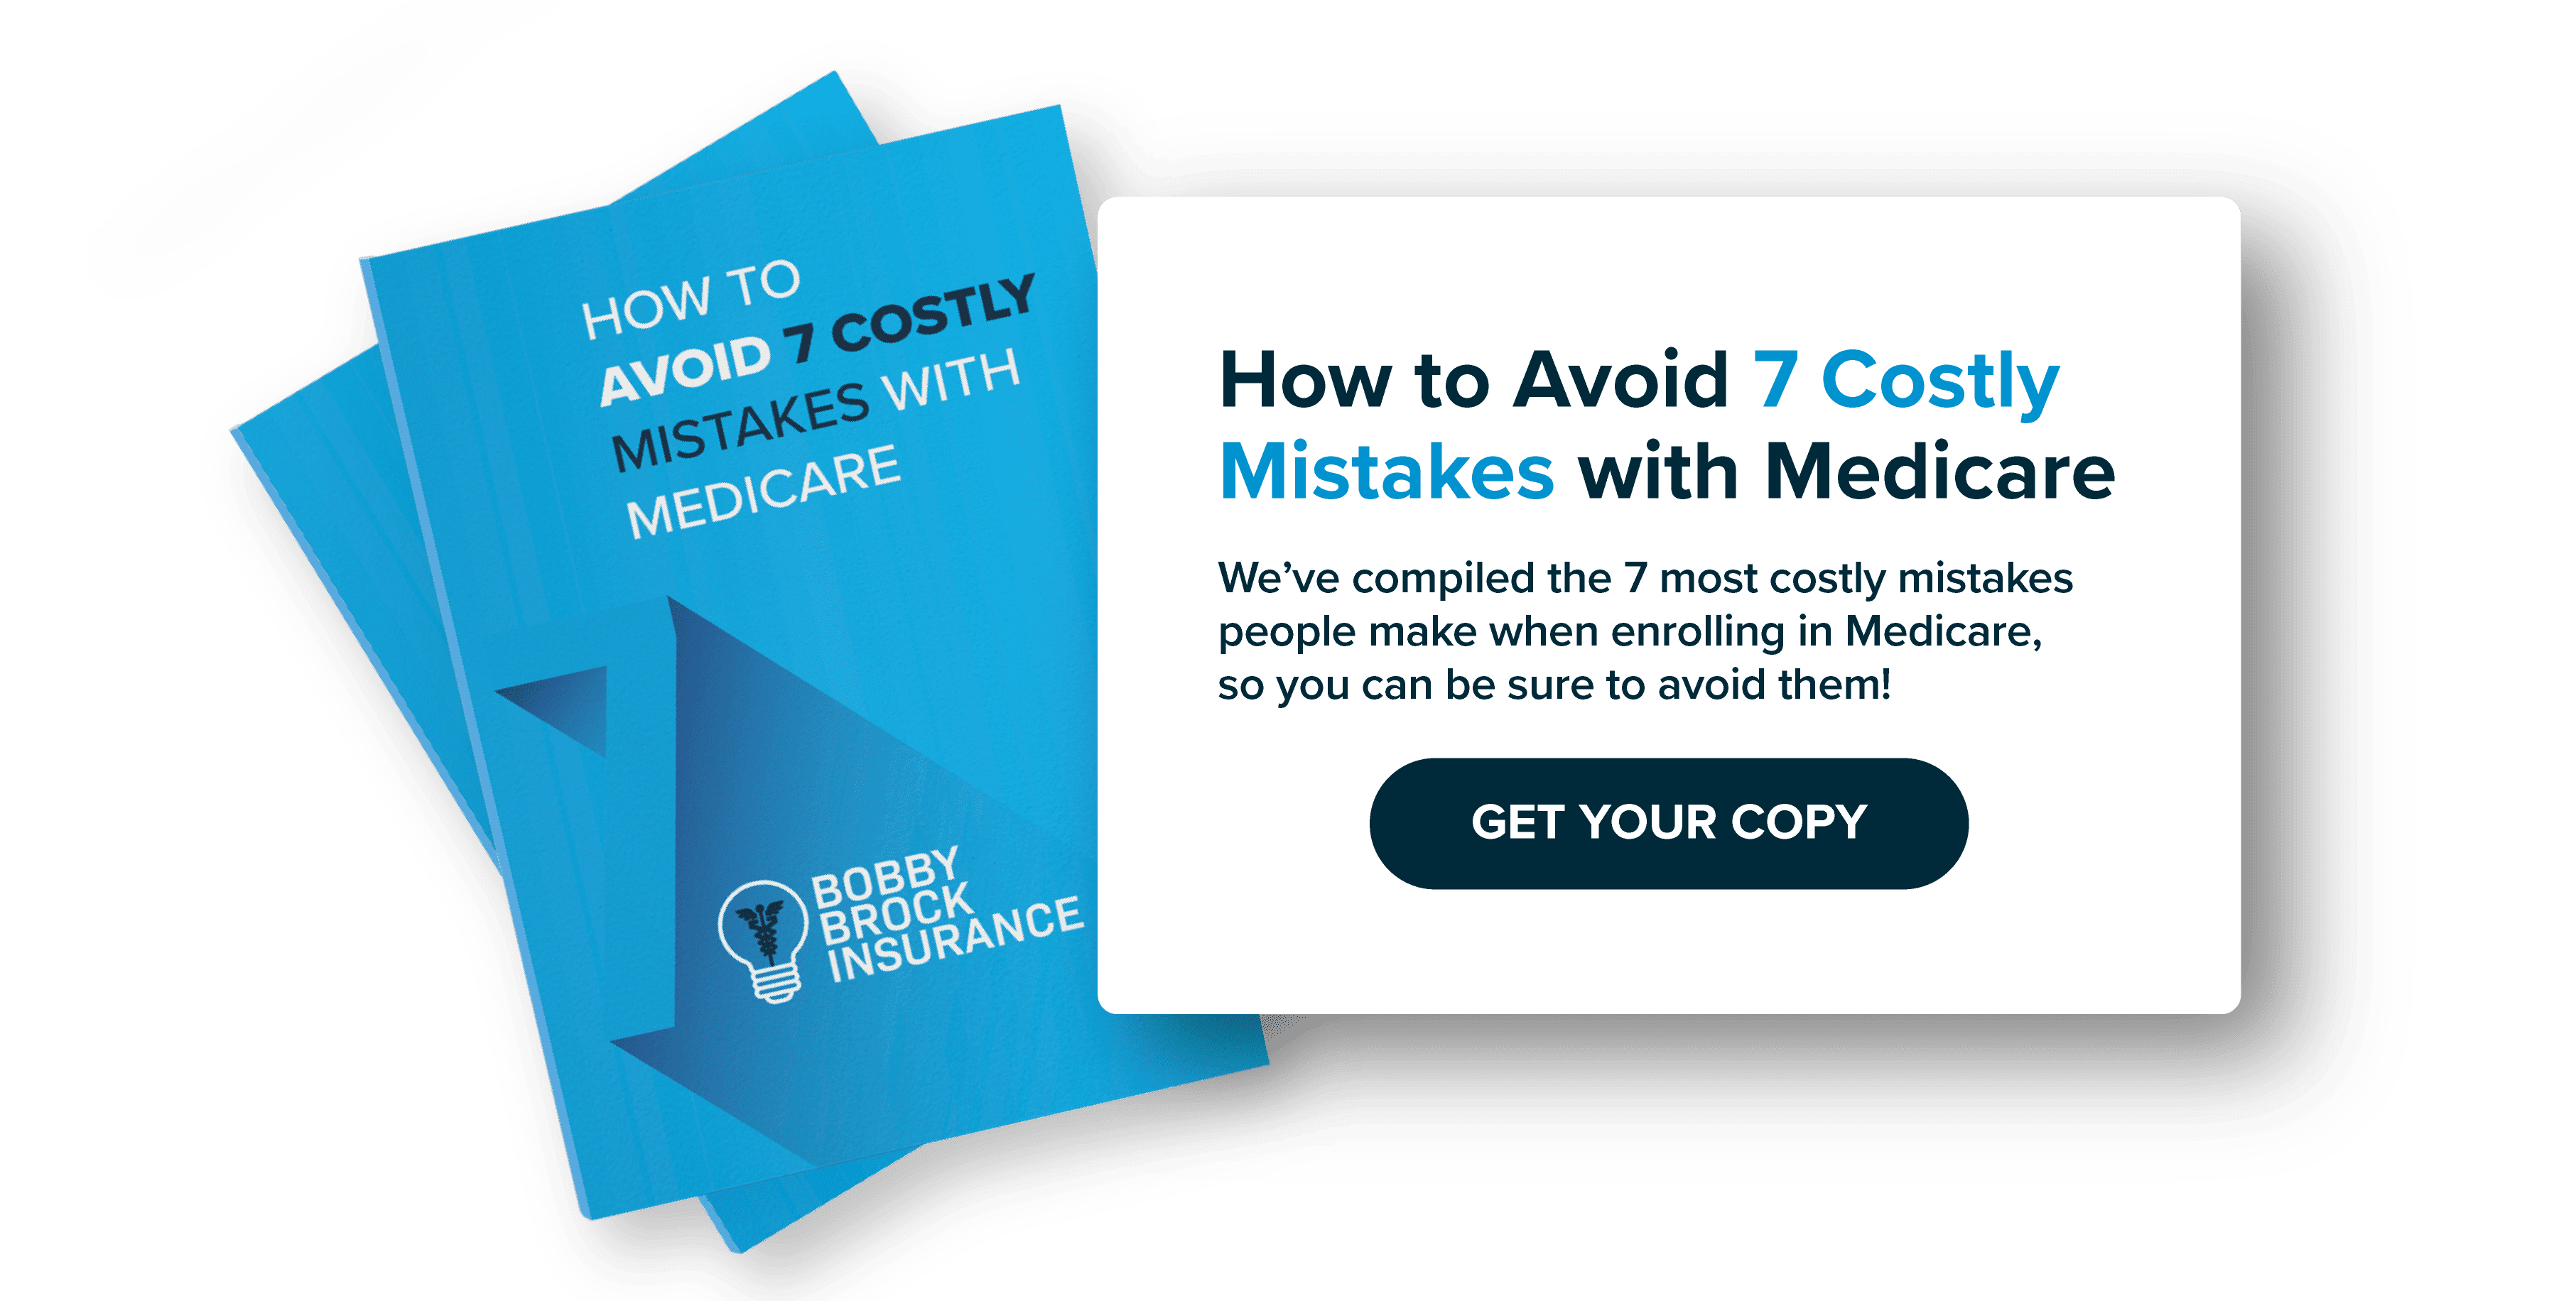 How to Avoid 7 Costly Medicare Mistakes